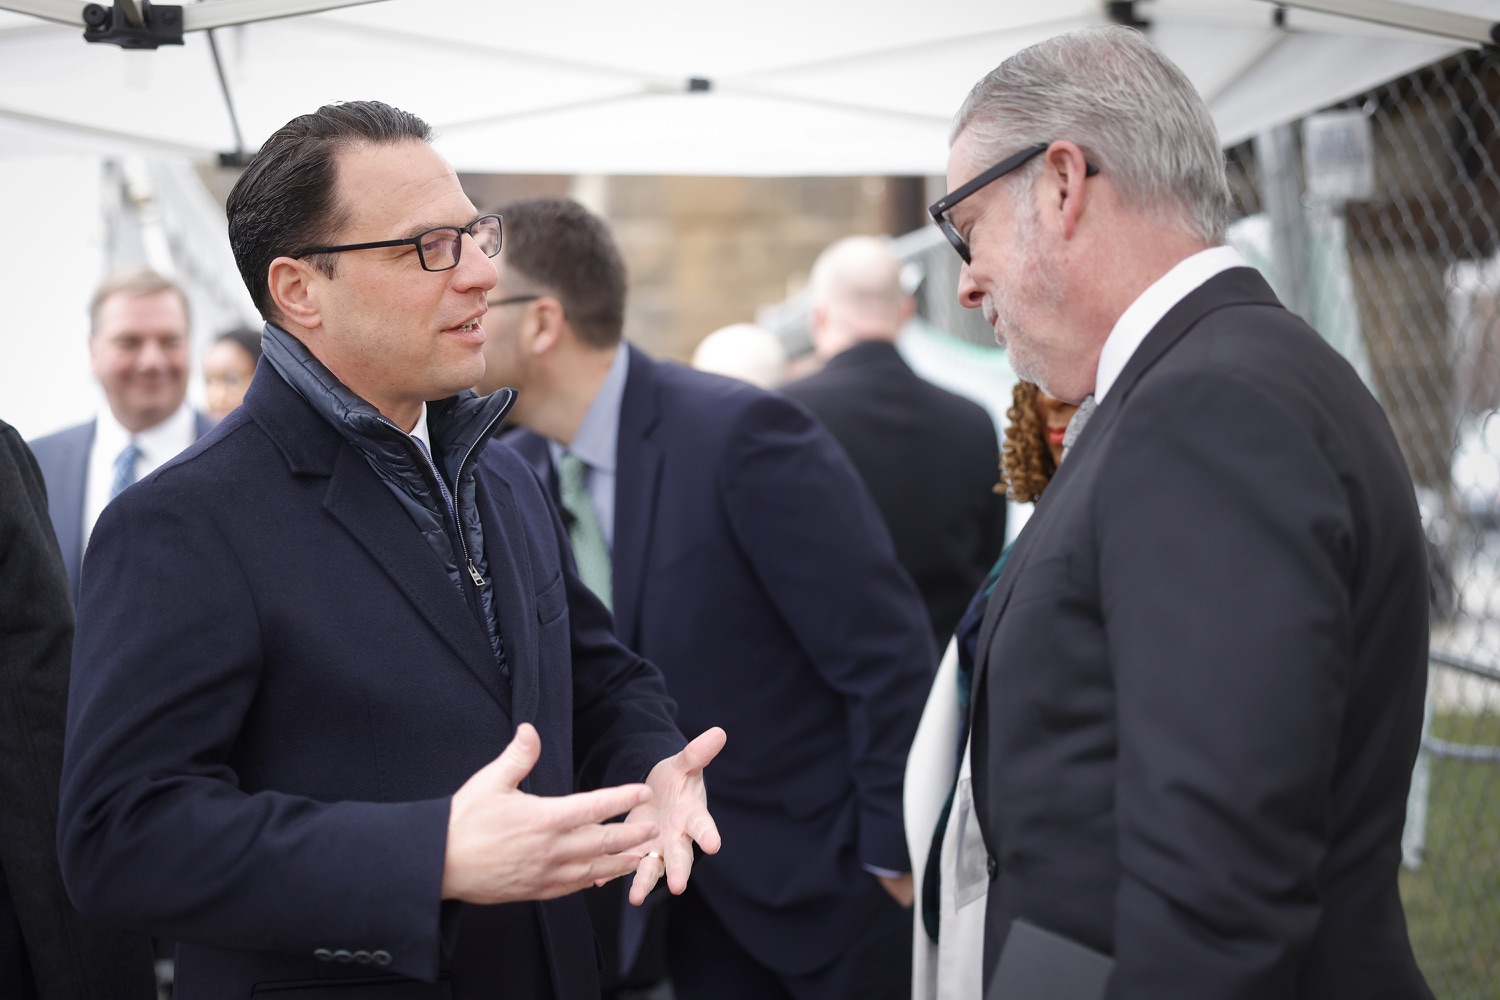 Pennsylvania Governor Josh Shapiro speaks with attendees.  Pennsylvania Governor Josh Shapiro participates in a groundbreaking for Spark Therapeutics at the future site of their new building, at 30th and Chestnut streets.  FEBRUARY 28, 2023 - PHILADELPHIA, PA<br><a href="https://filesource.amperwave.net/commonwealthofpa/photo/22728_gov_spark_dz_0017.JPG" target="_blank">⇣ Download Photo</a>